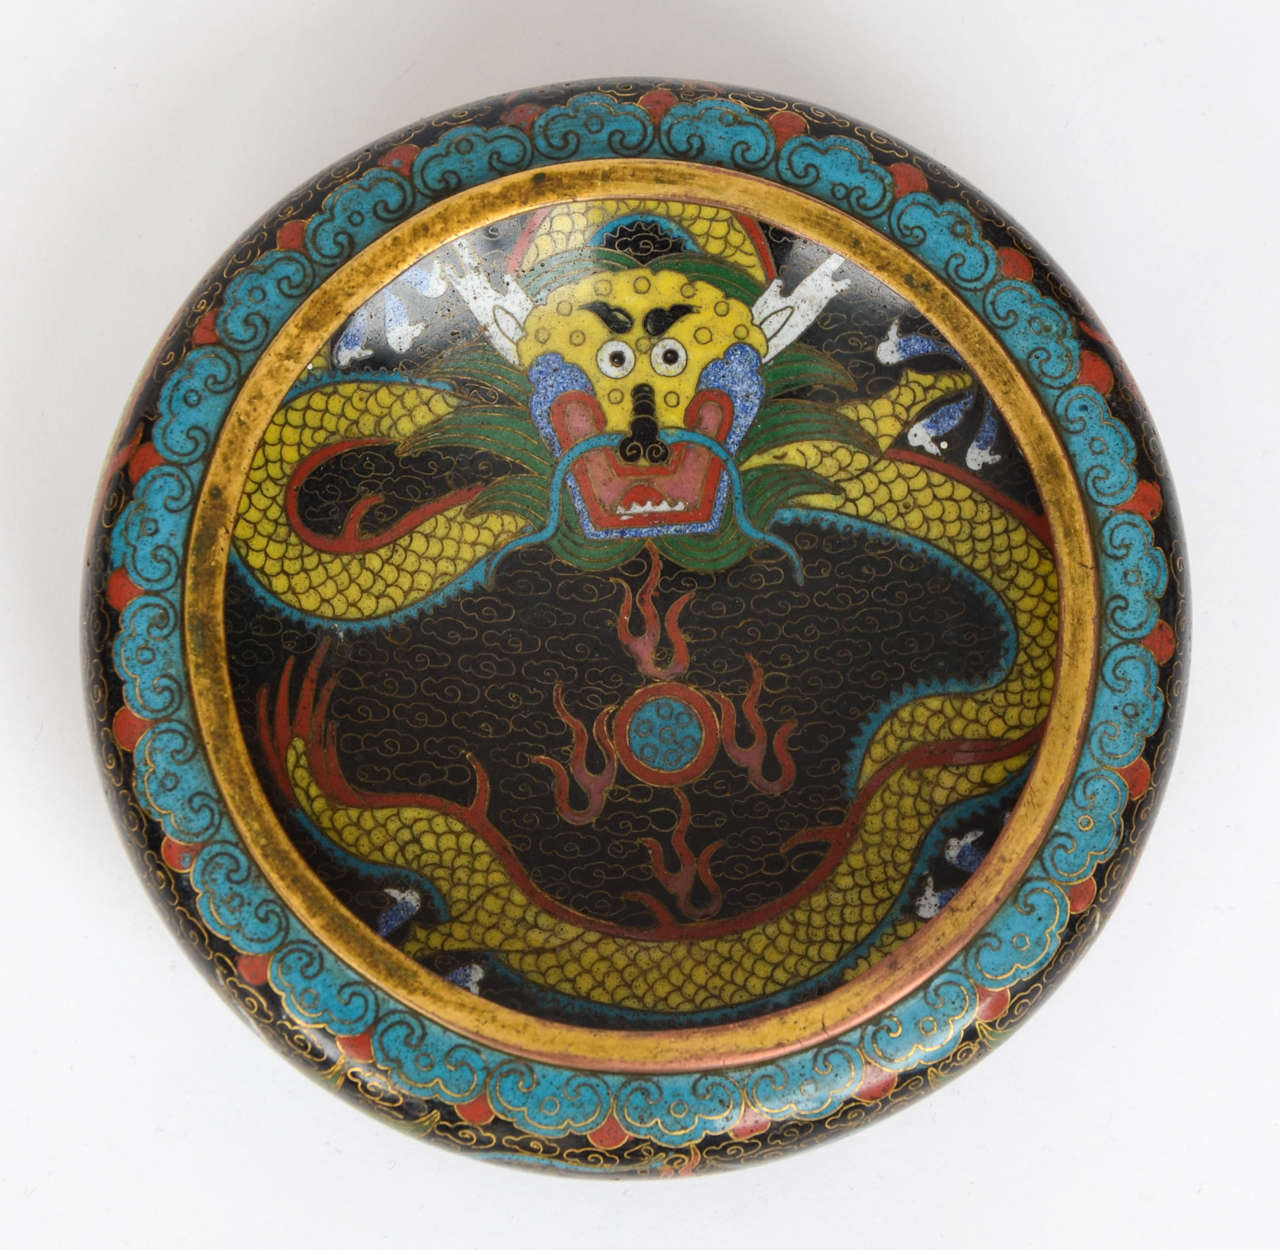 A quality shallow CLOISONNE bowl made in China in the early 19th Century.

The bowl is of circular with a short foot. 

This is a beautifully made and designed piece painted in rich enamels.
The decoration shows mythical five clawed dragons